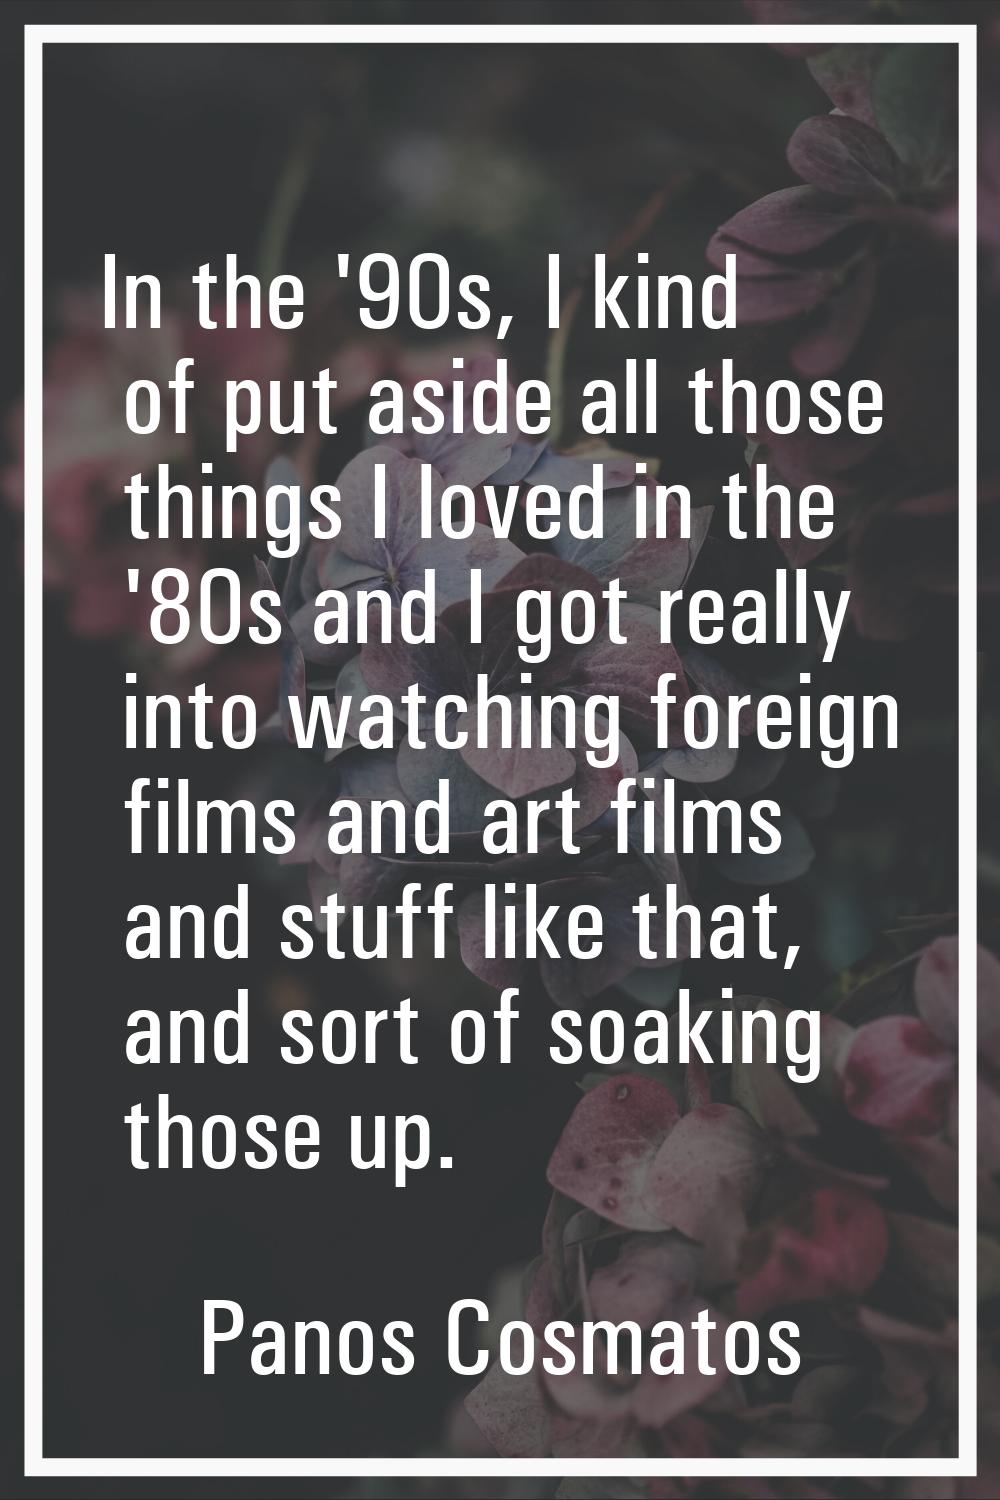 In the '90s, I kind of put aside all those things I loved in the '80s and I got really into watchin